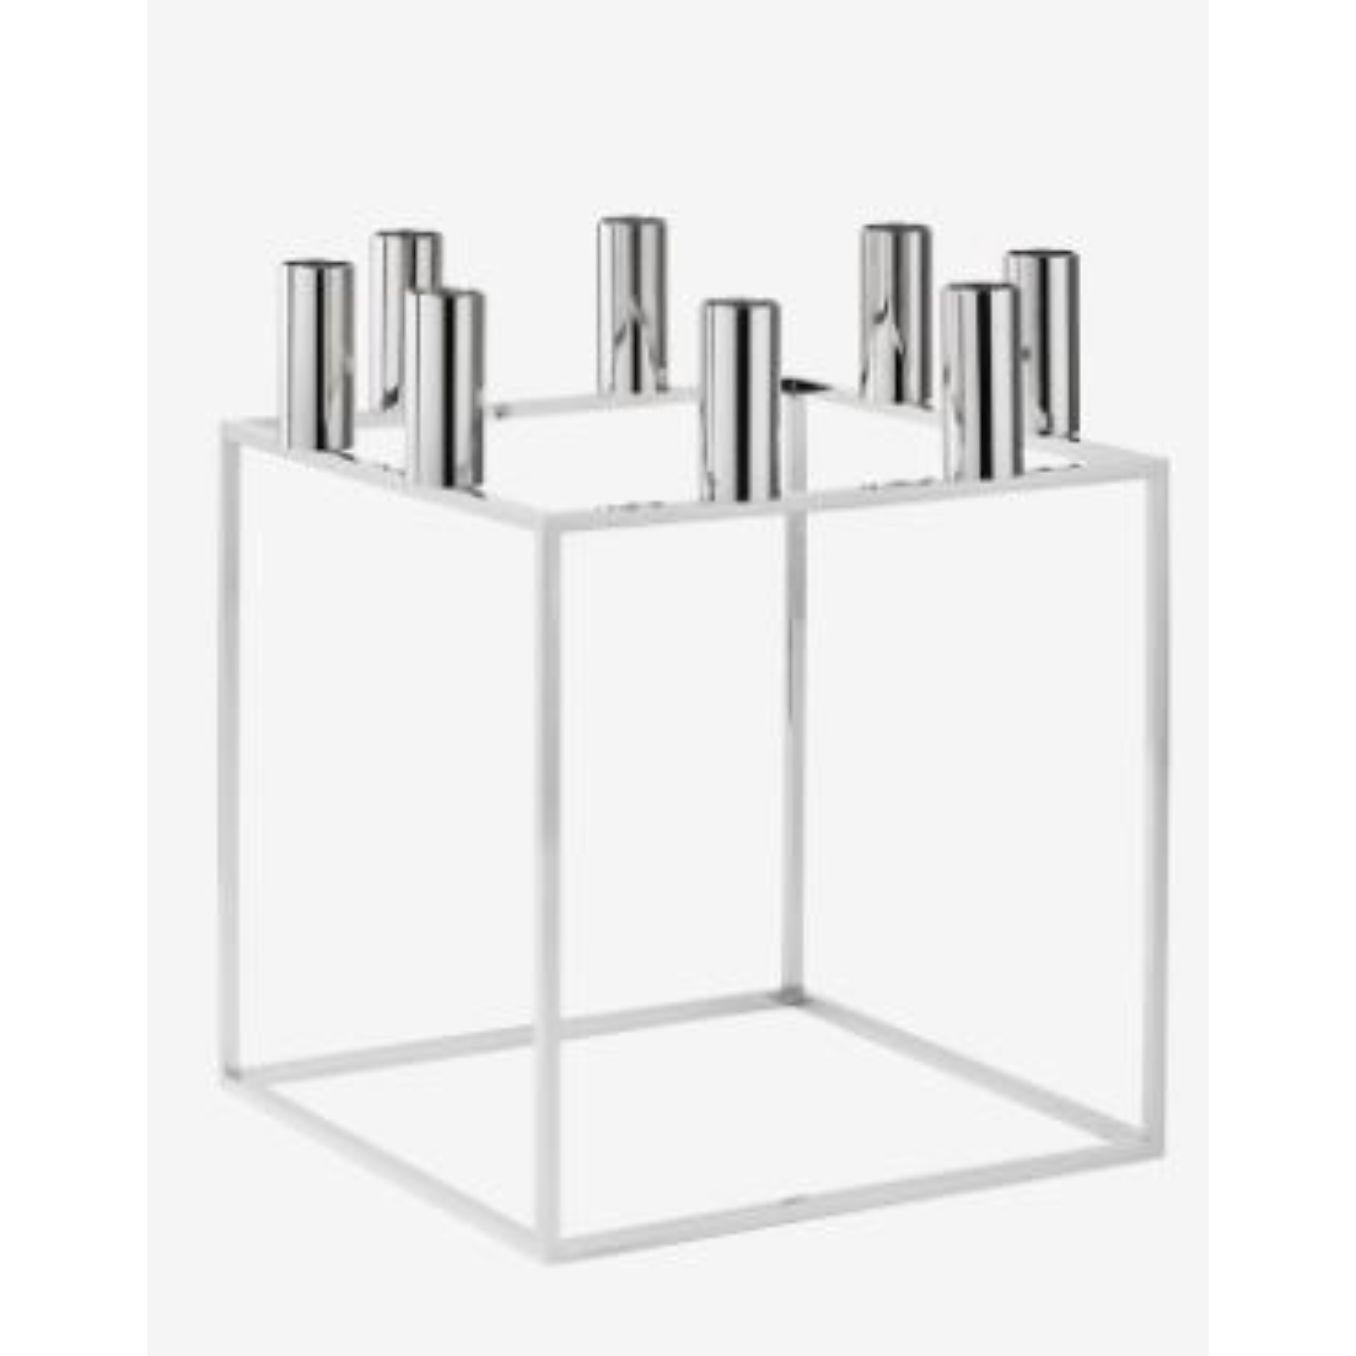 Nickel Plated Kubus 8 candle holder by Lassen
Dimensions: D 23 x W 23 x H 29 cm 
Materials: Metal 
Also available in different dimensions. 
Weight: 1.50 Kg

With a sharp sense of contemporary Functionalist style, Mogens Lassen designed the